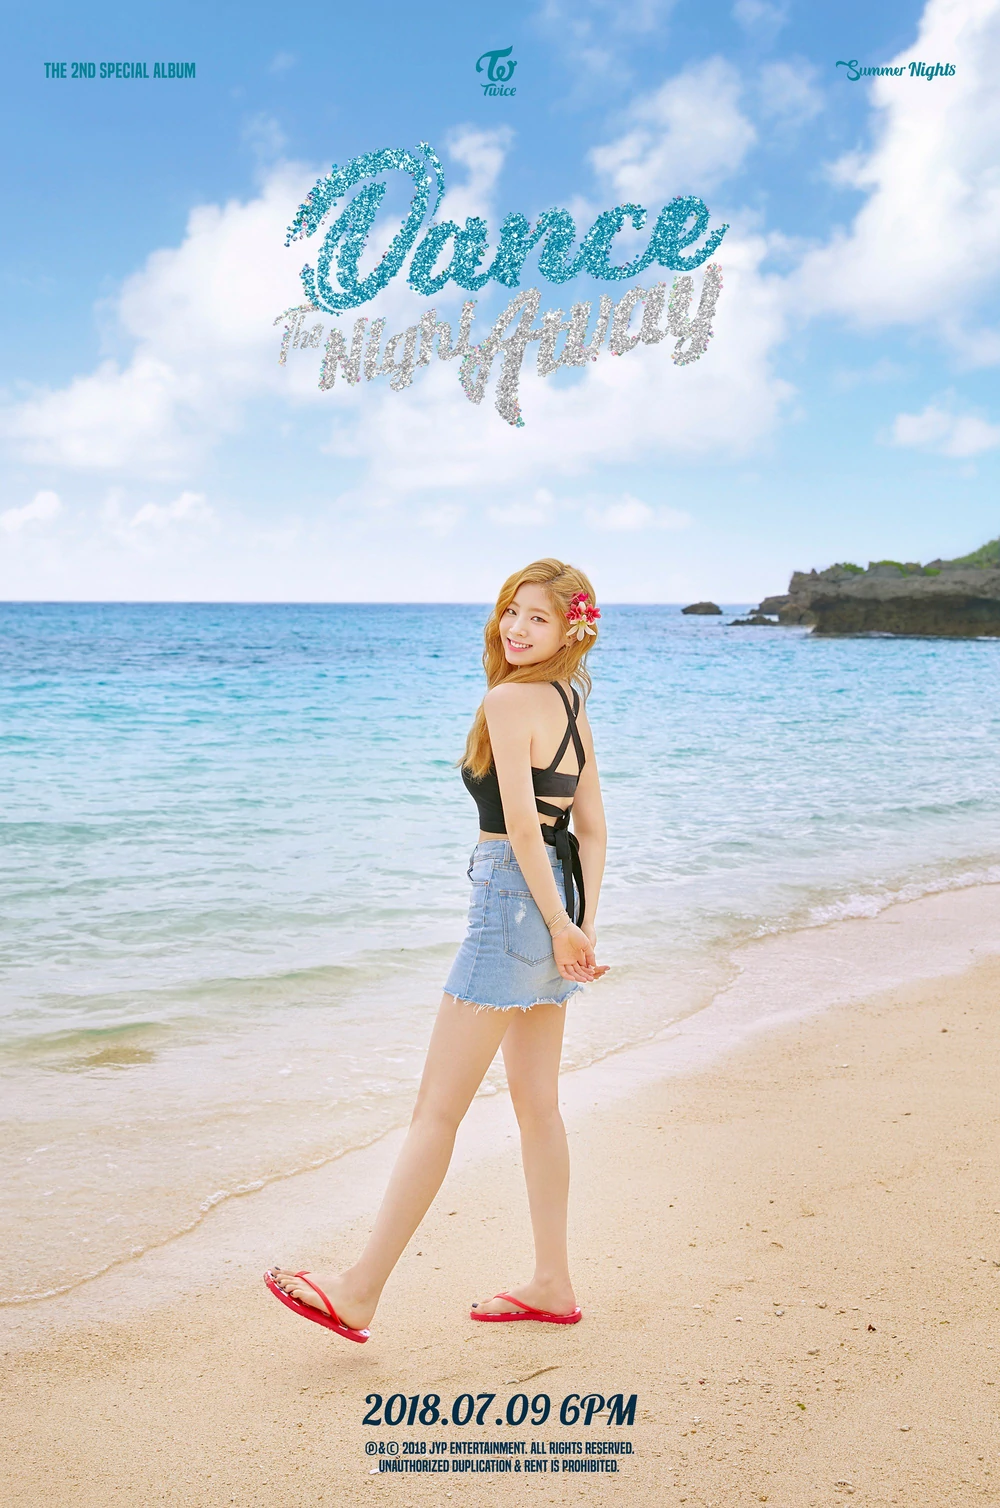 Twice Summer Nights Dahyun Concept Teaser Picture Image Photo Kpop K-Concept 4